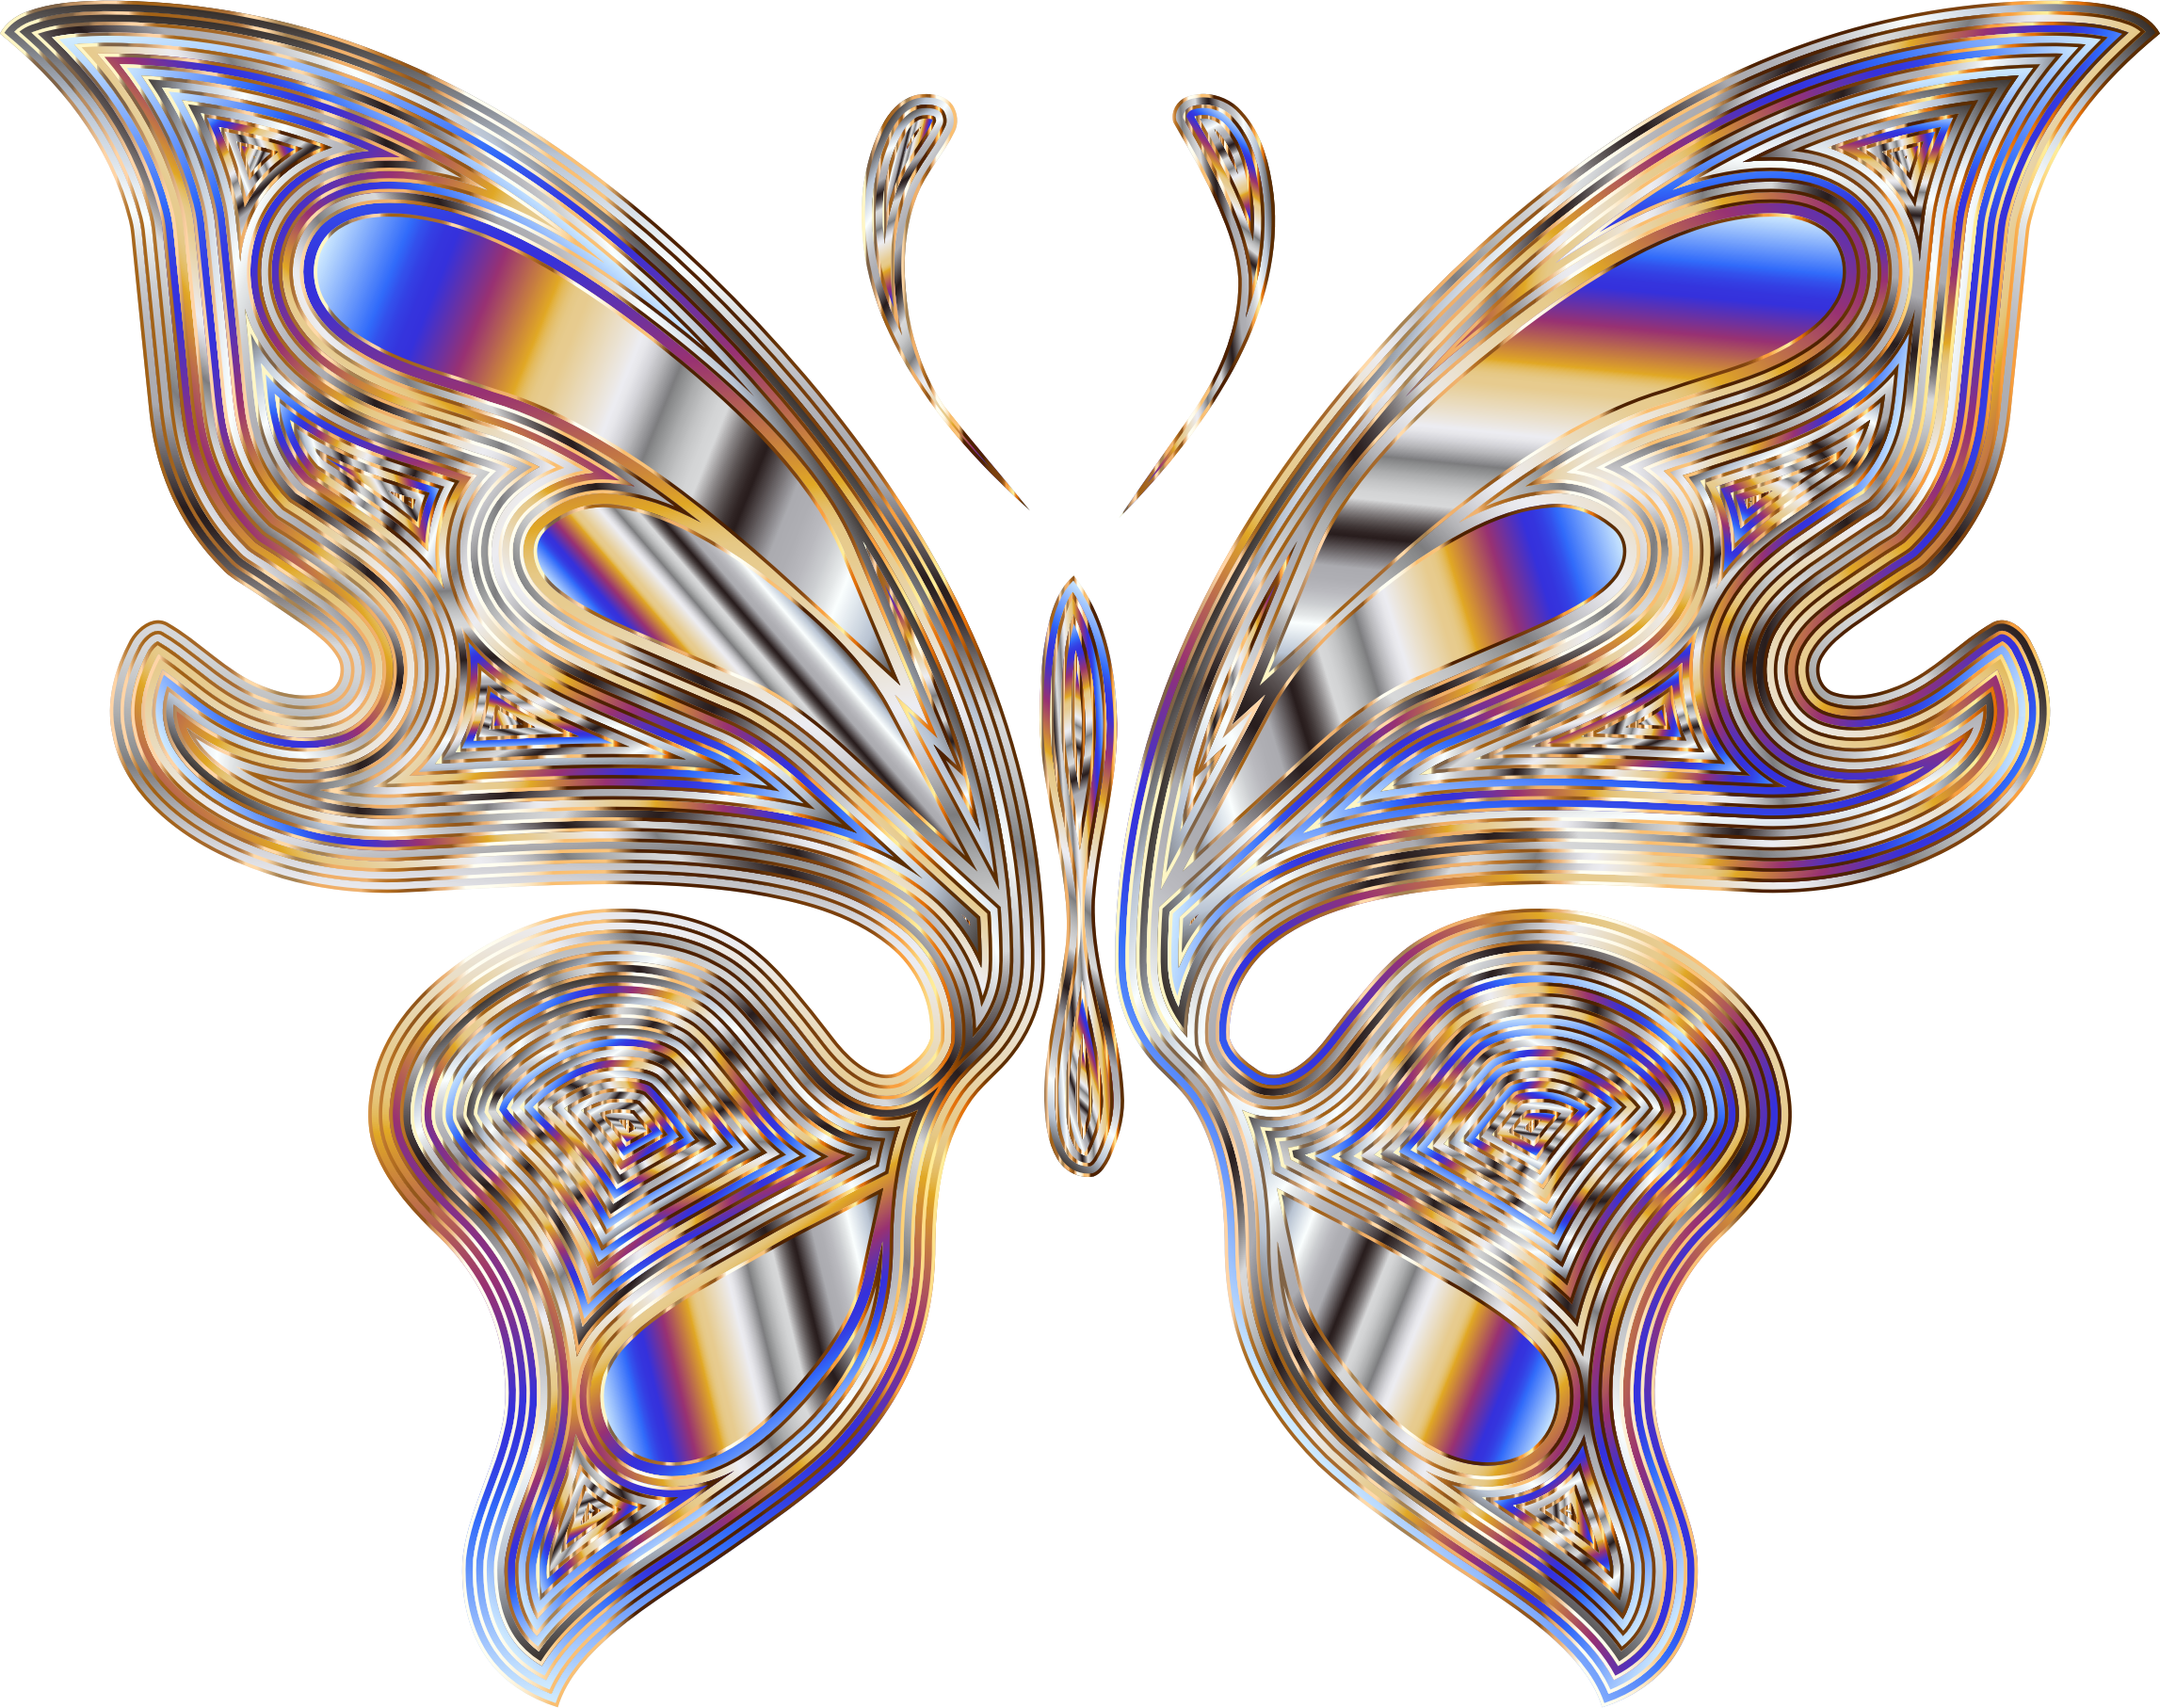 Butterfly 18 No Background - Transparent Background Butterfly Png (2294x1814)